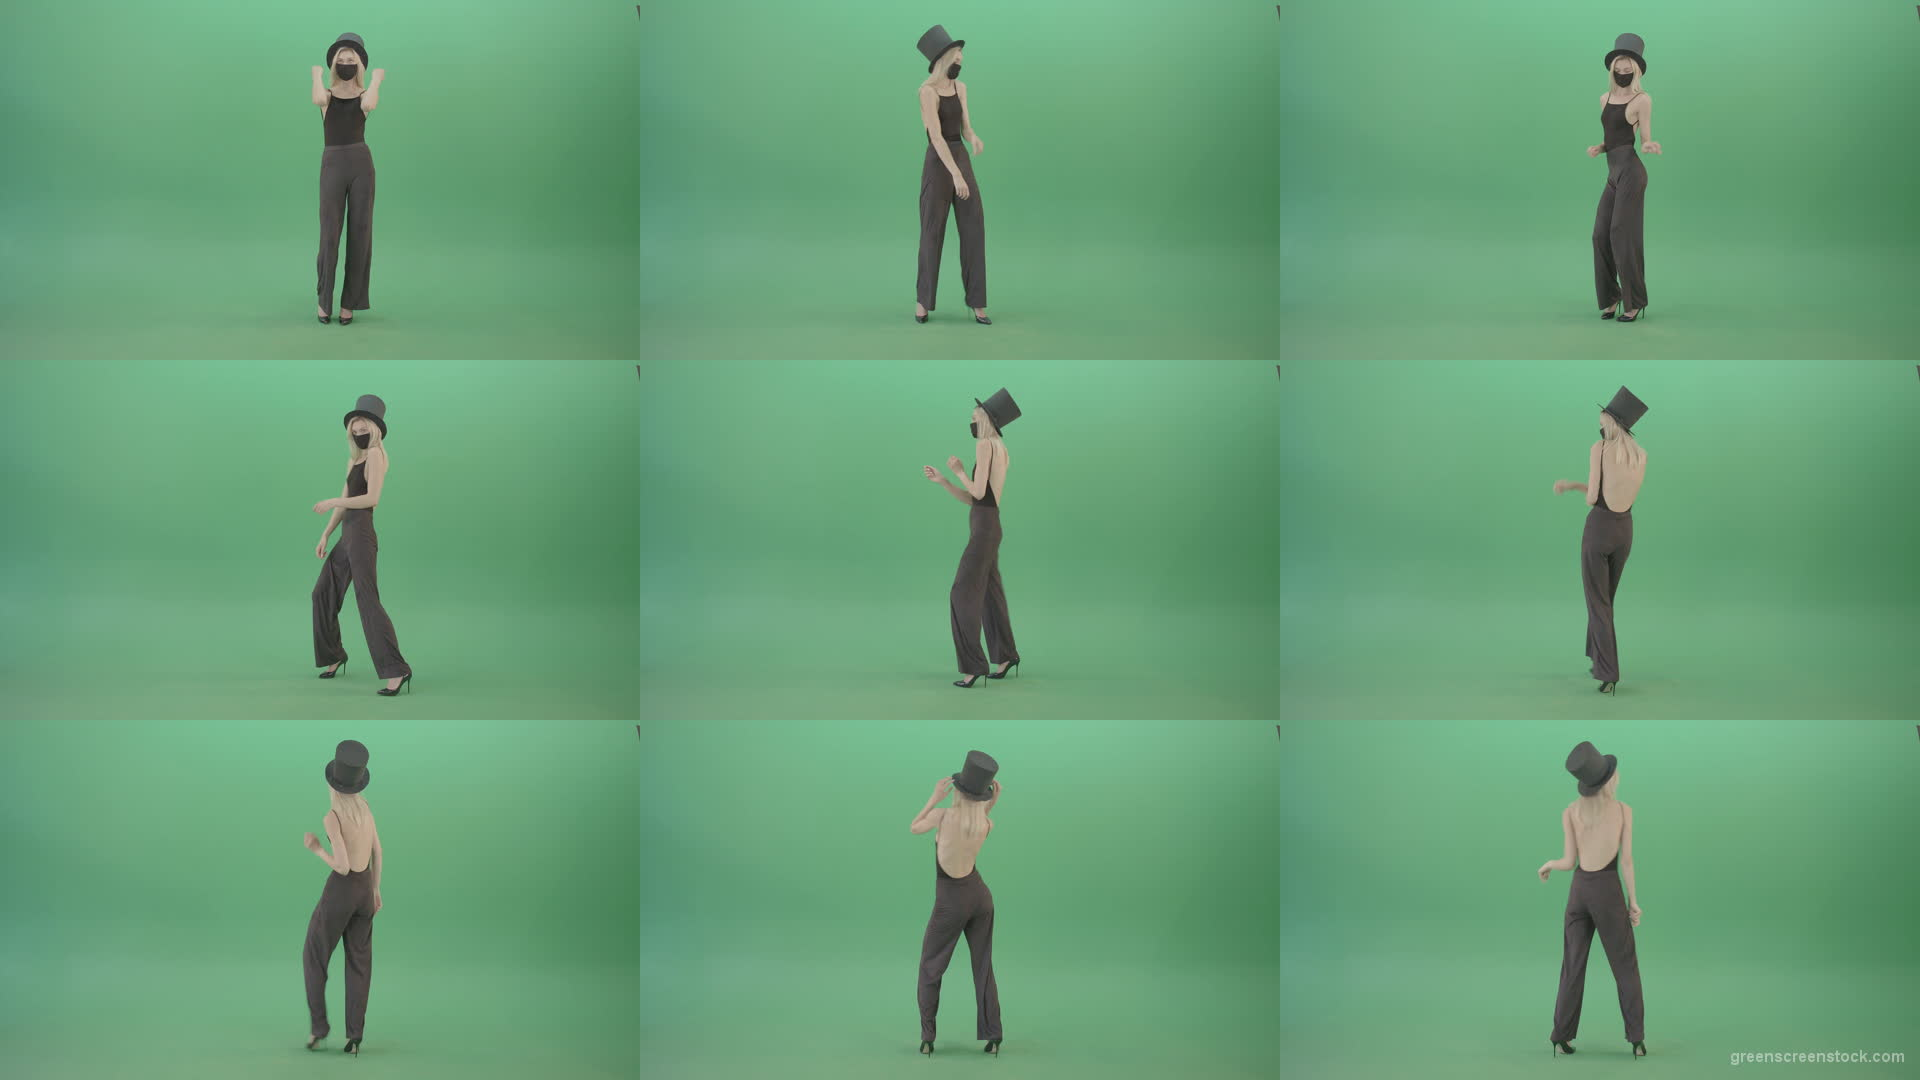 Covid-Mask-Girl-in-Black-cylinder-Hat-dancing-in-front-and-back-side-view-isolated-on-green-screen-Video-Footage-1920 Green Screen Stock